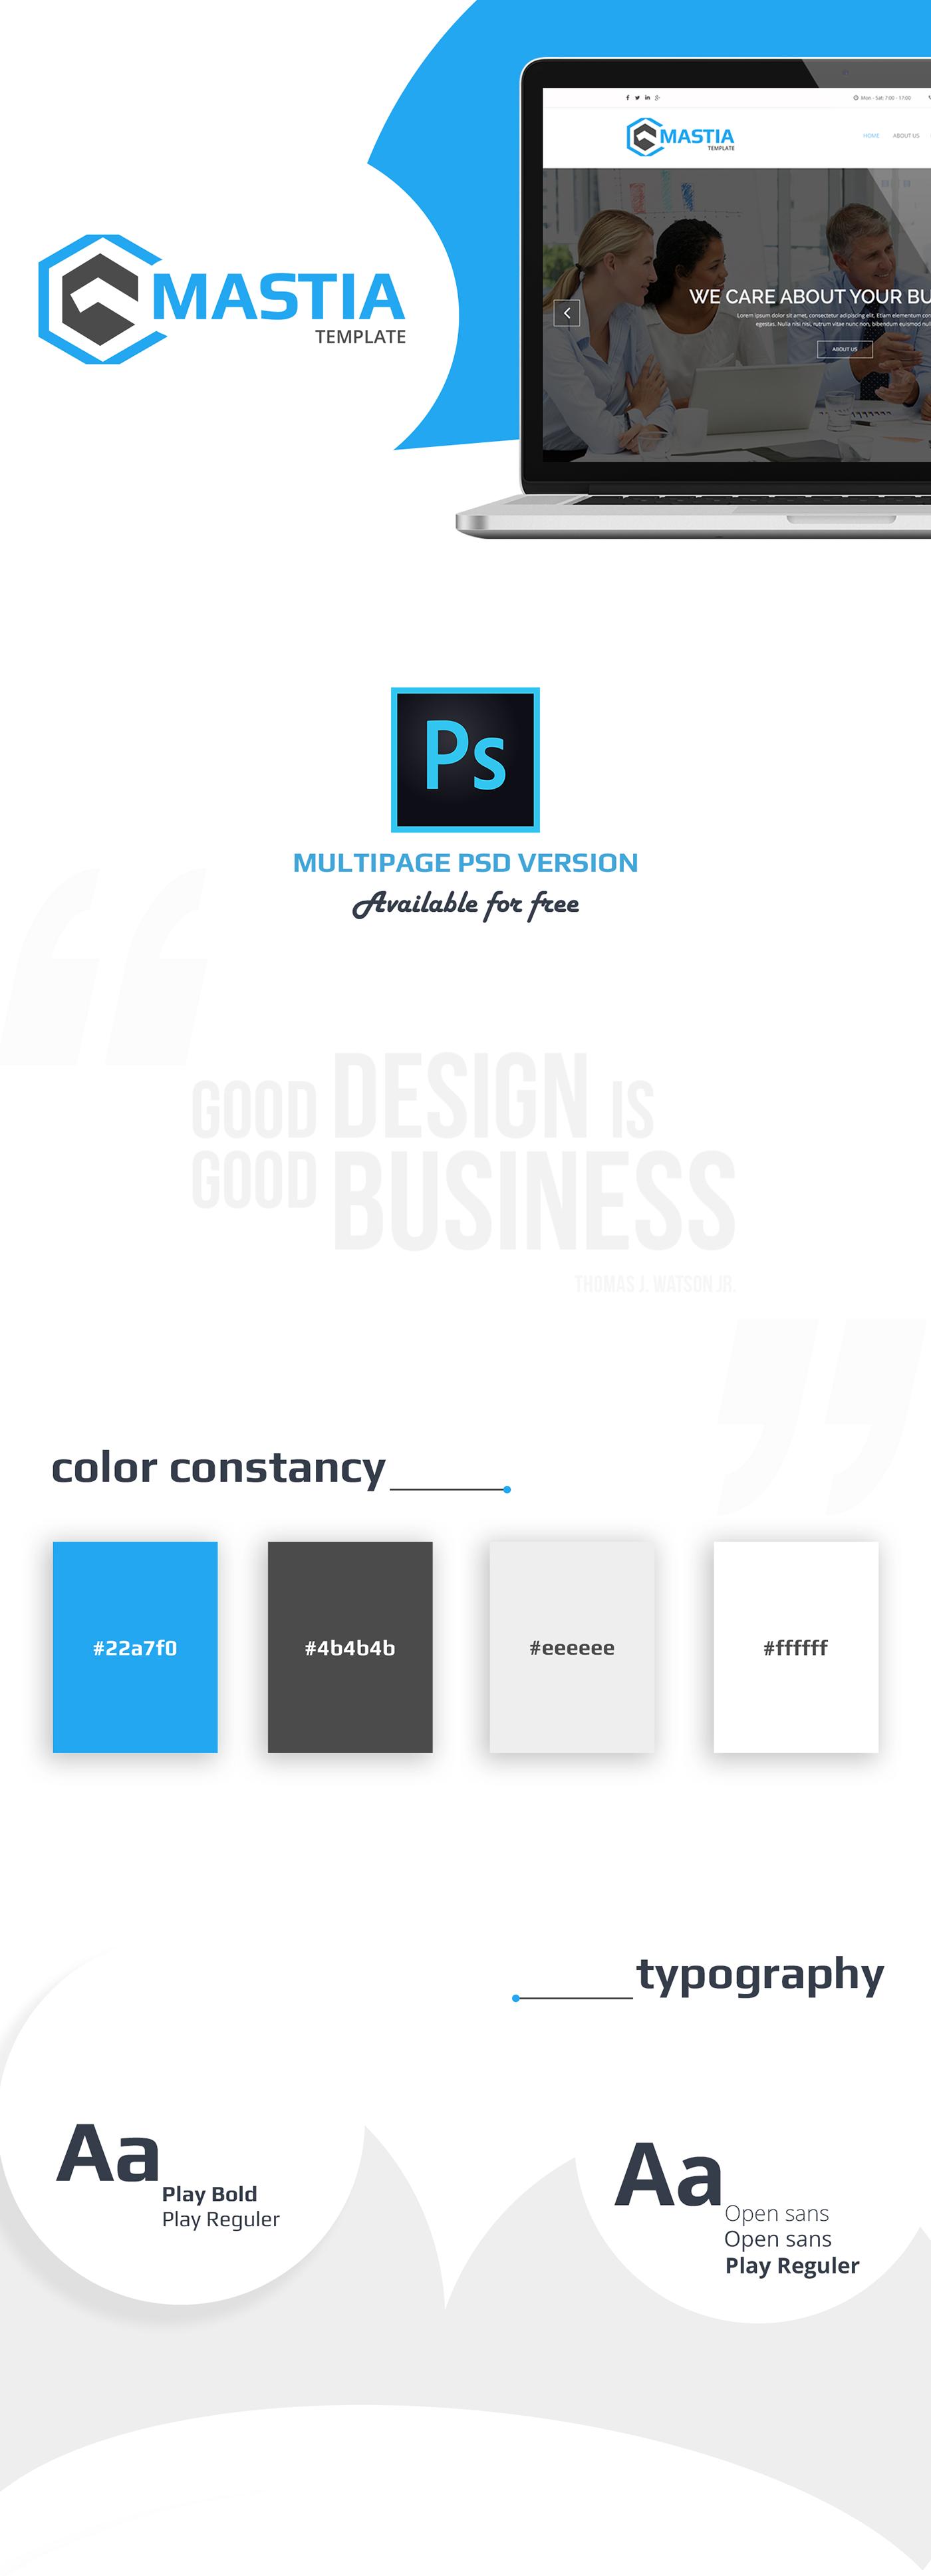 Download Mastia Multipage Psd Web Template Free Download On Behance PSD Mockup Templates